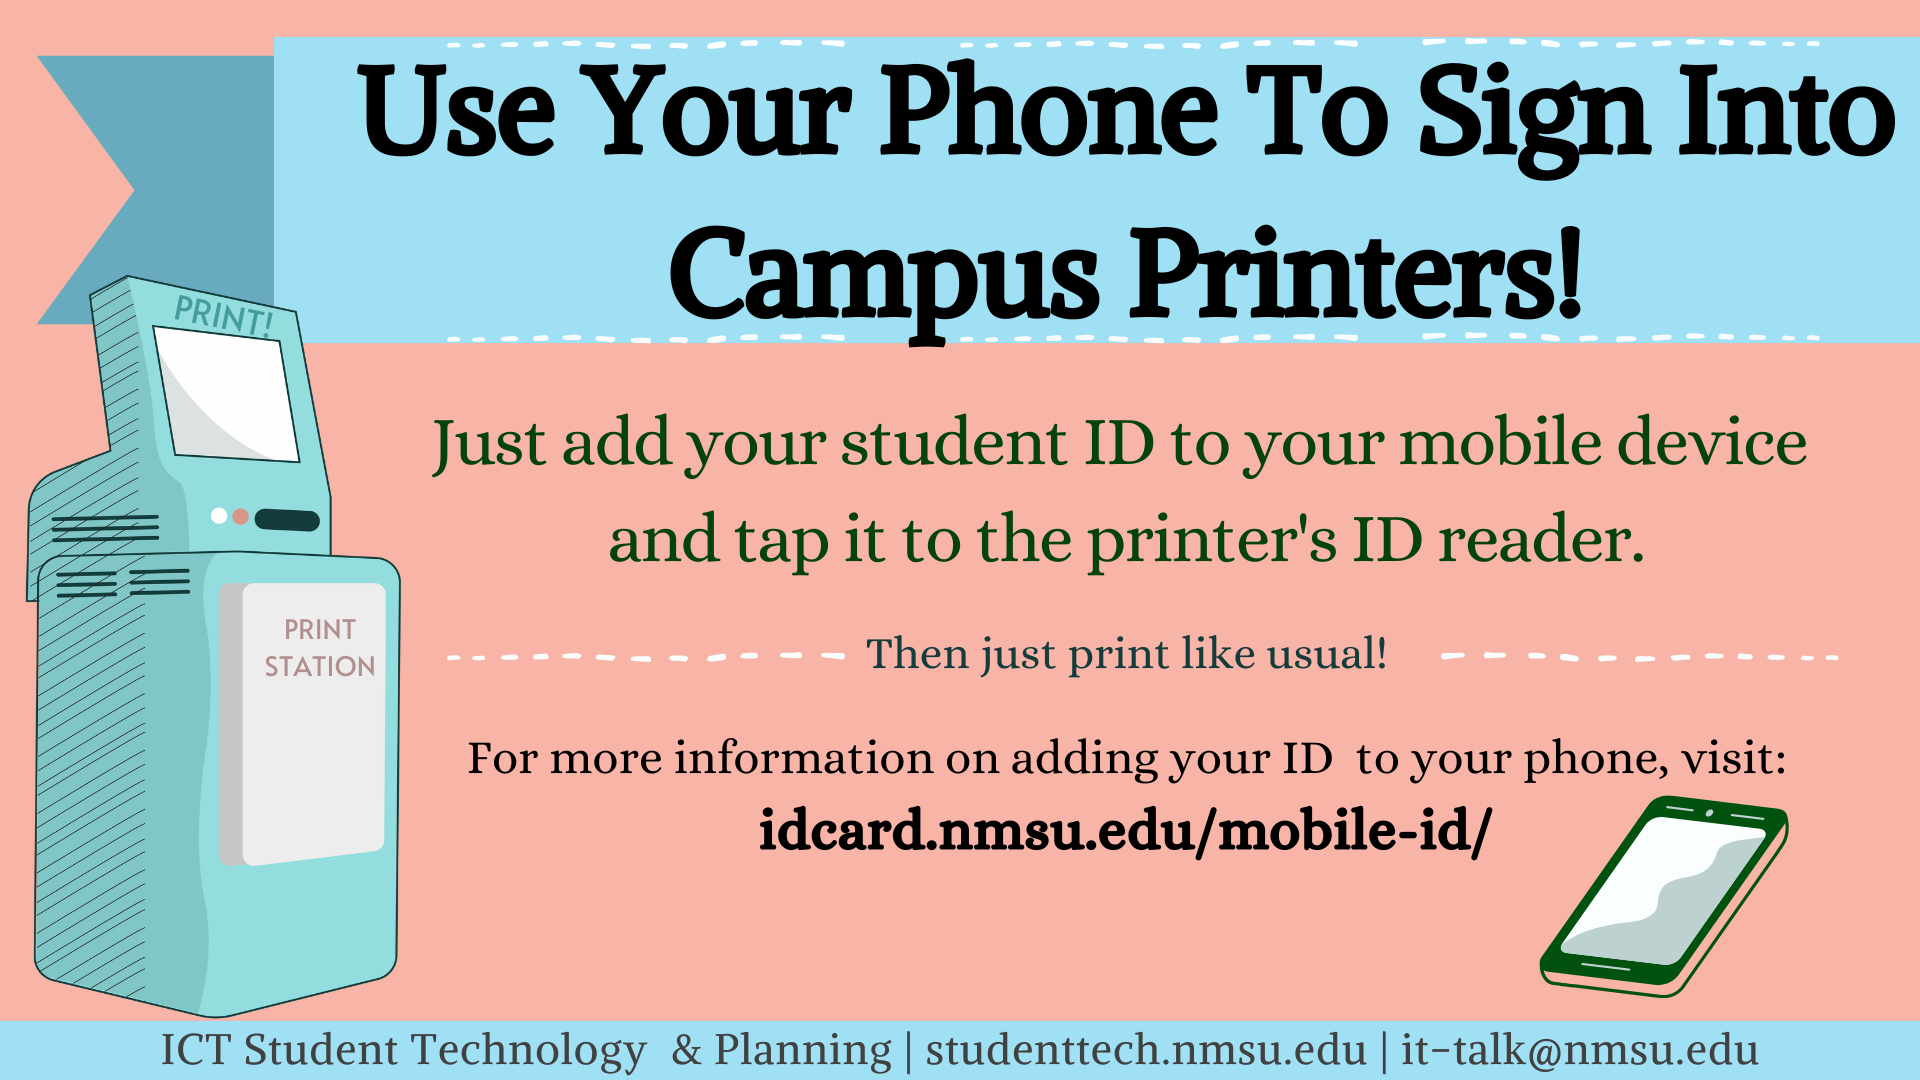 Use your phone to sign into campus printers! Add your student ID to you mobile device, and tap it against the printer's ID reader. To learn how, visit idcard.nmsu.edu/mobile-id.